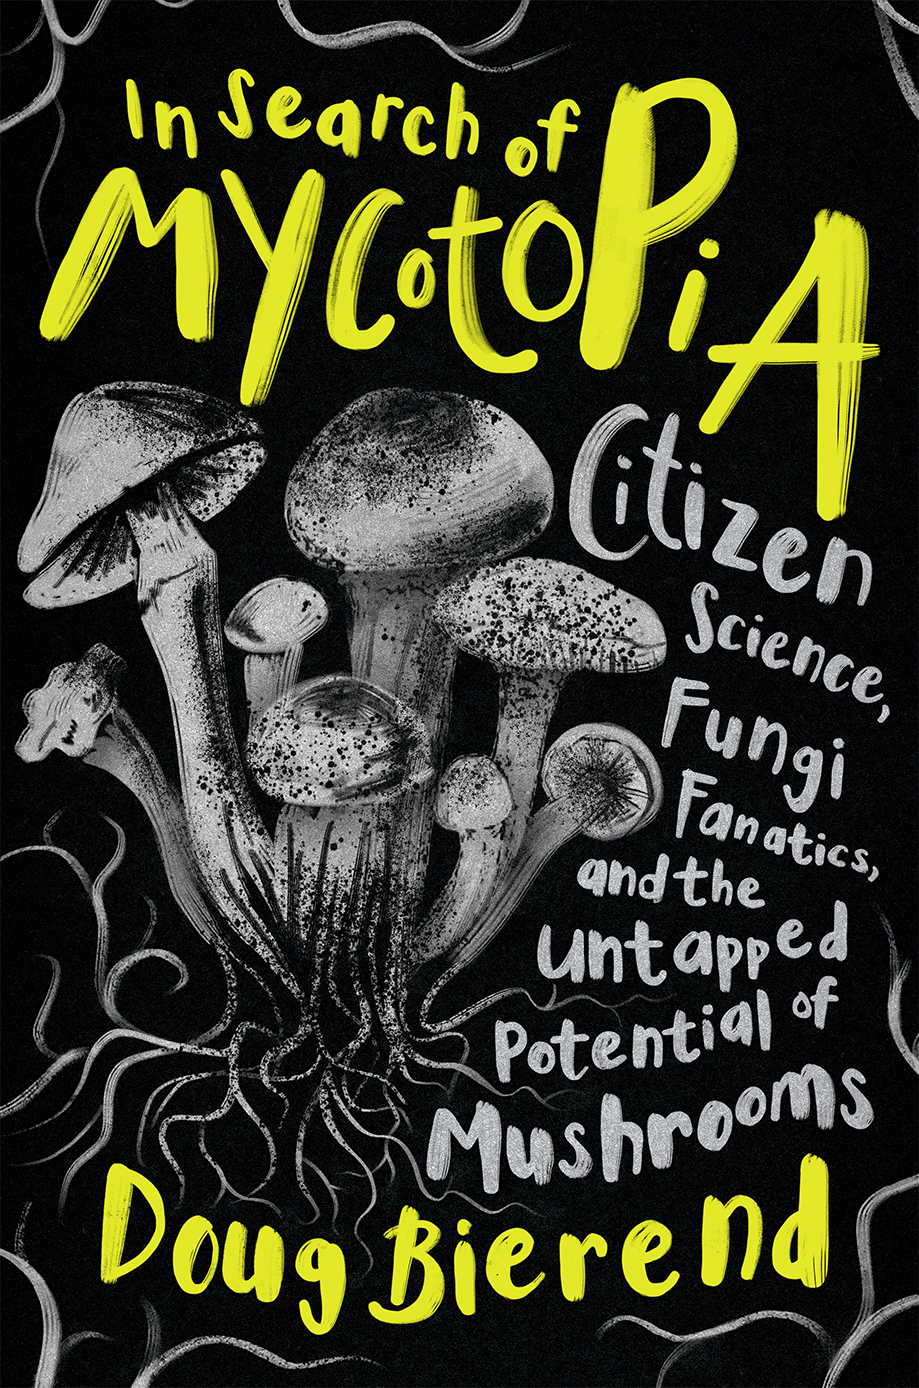 In search of mycotopia : citizen science, fungi fanatics, and the untapped potential of mushrooms圖片